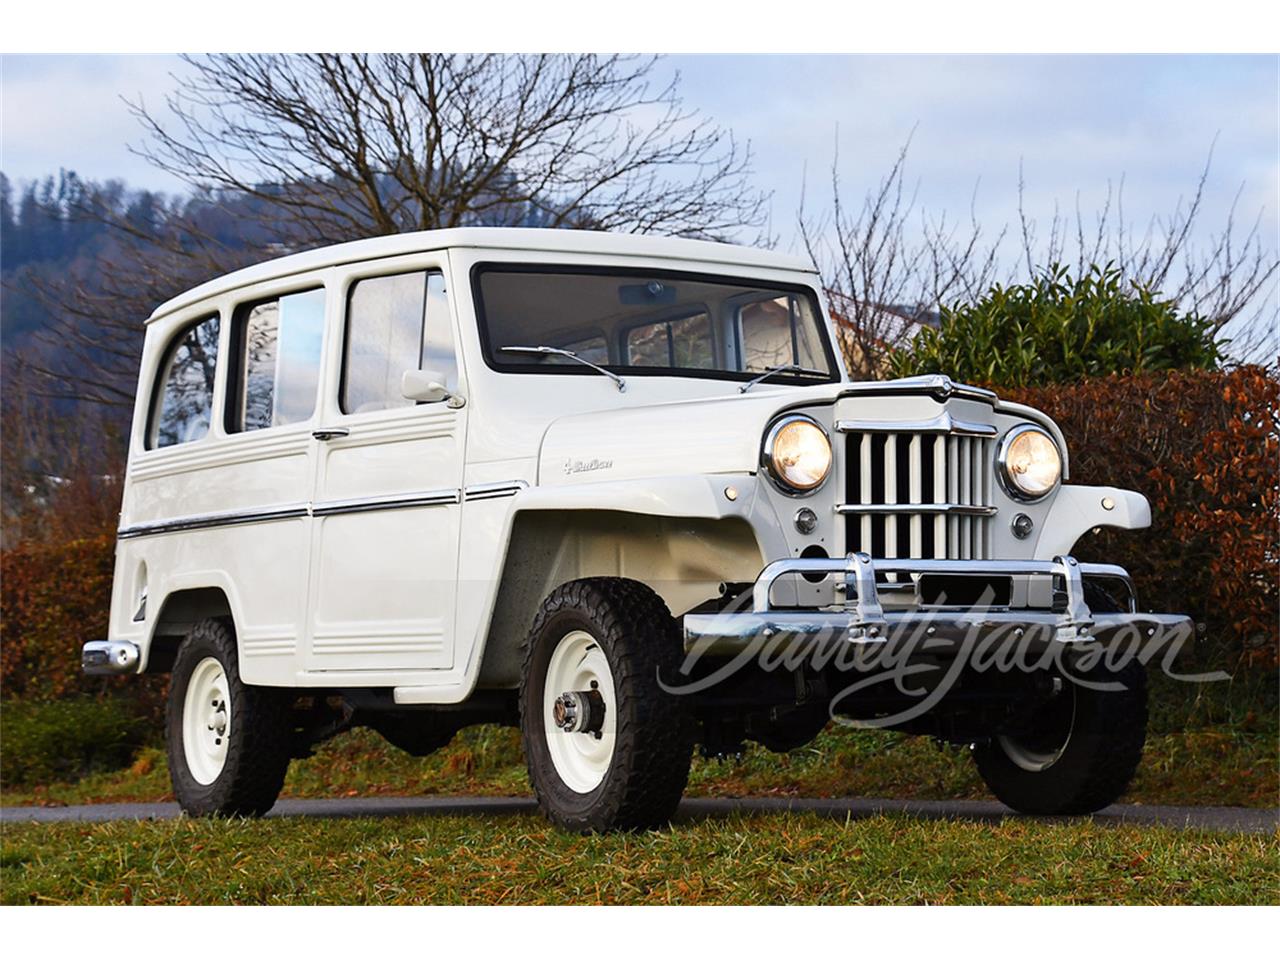 For Sale at Auction: 1960 Willys Jeep in Scottsdale, Arizona for sale in Scottsdale, AZ